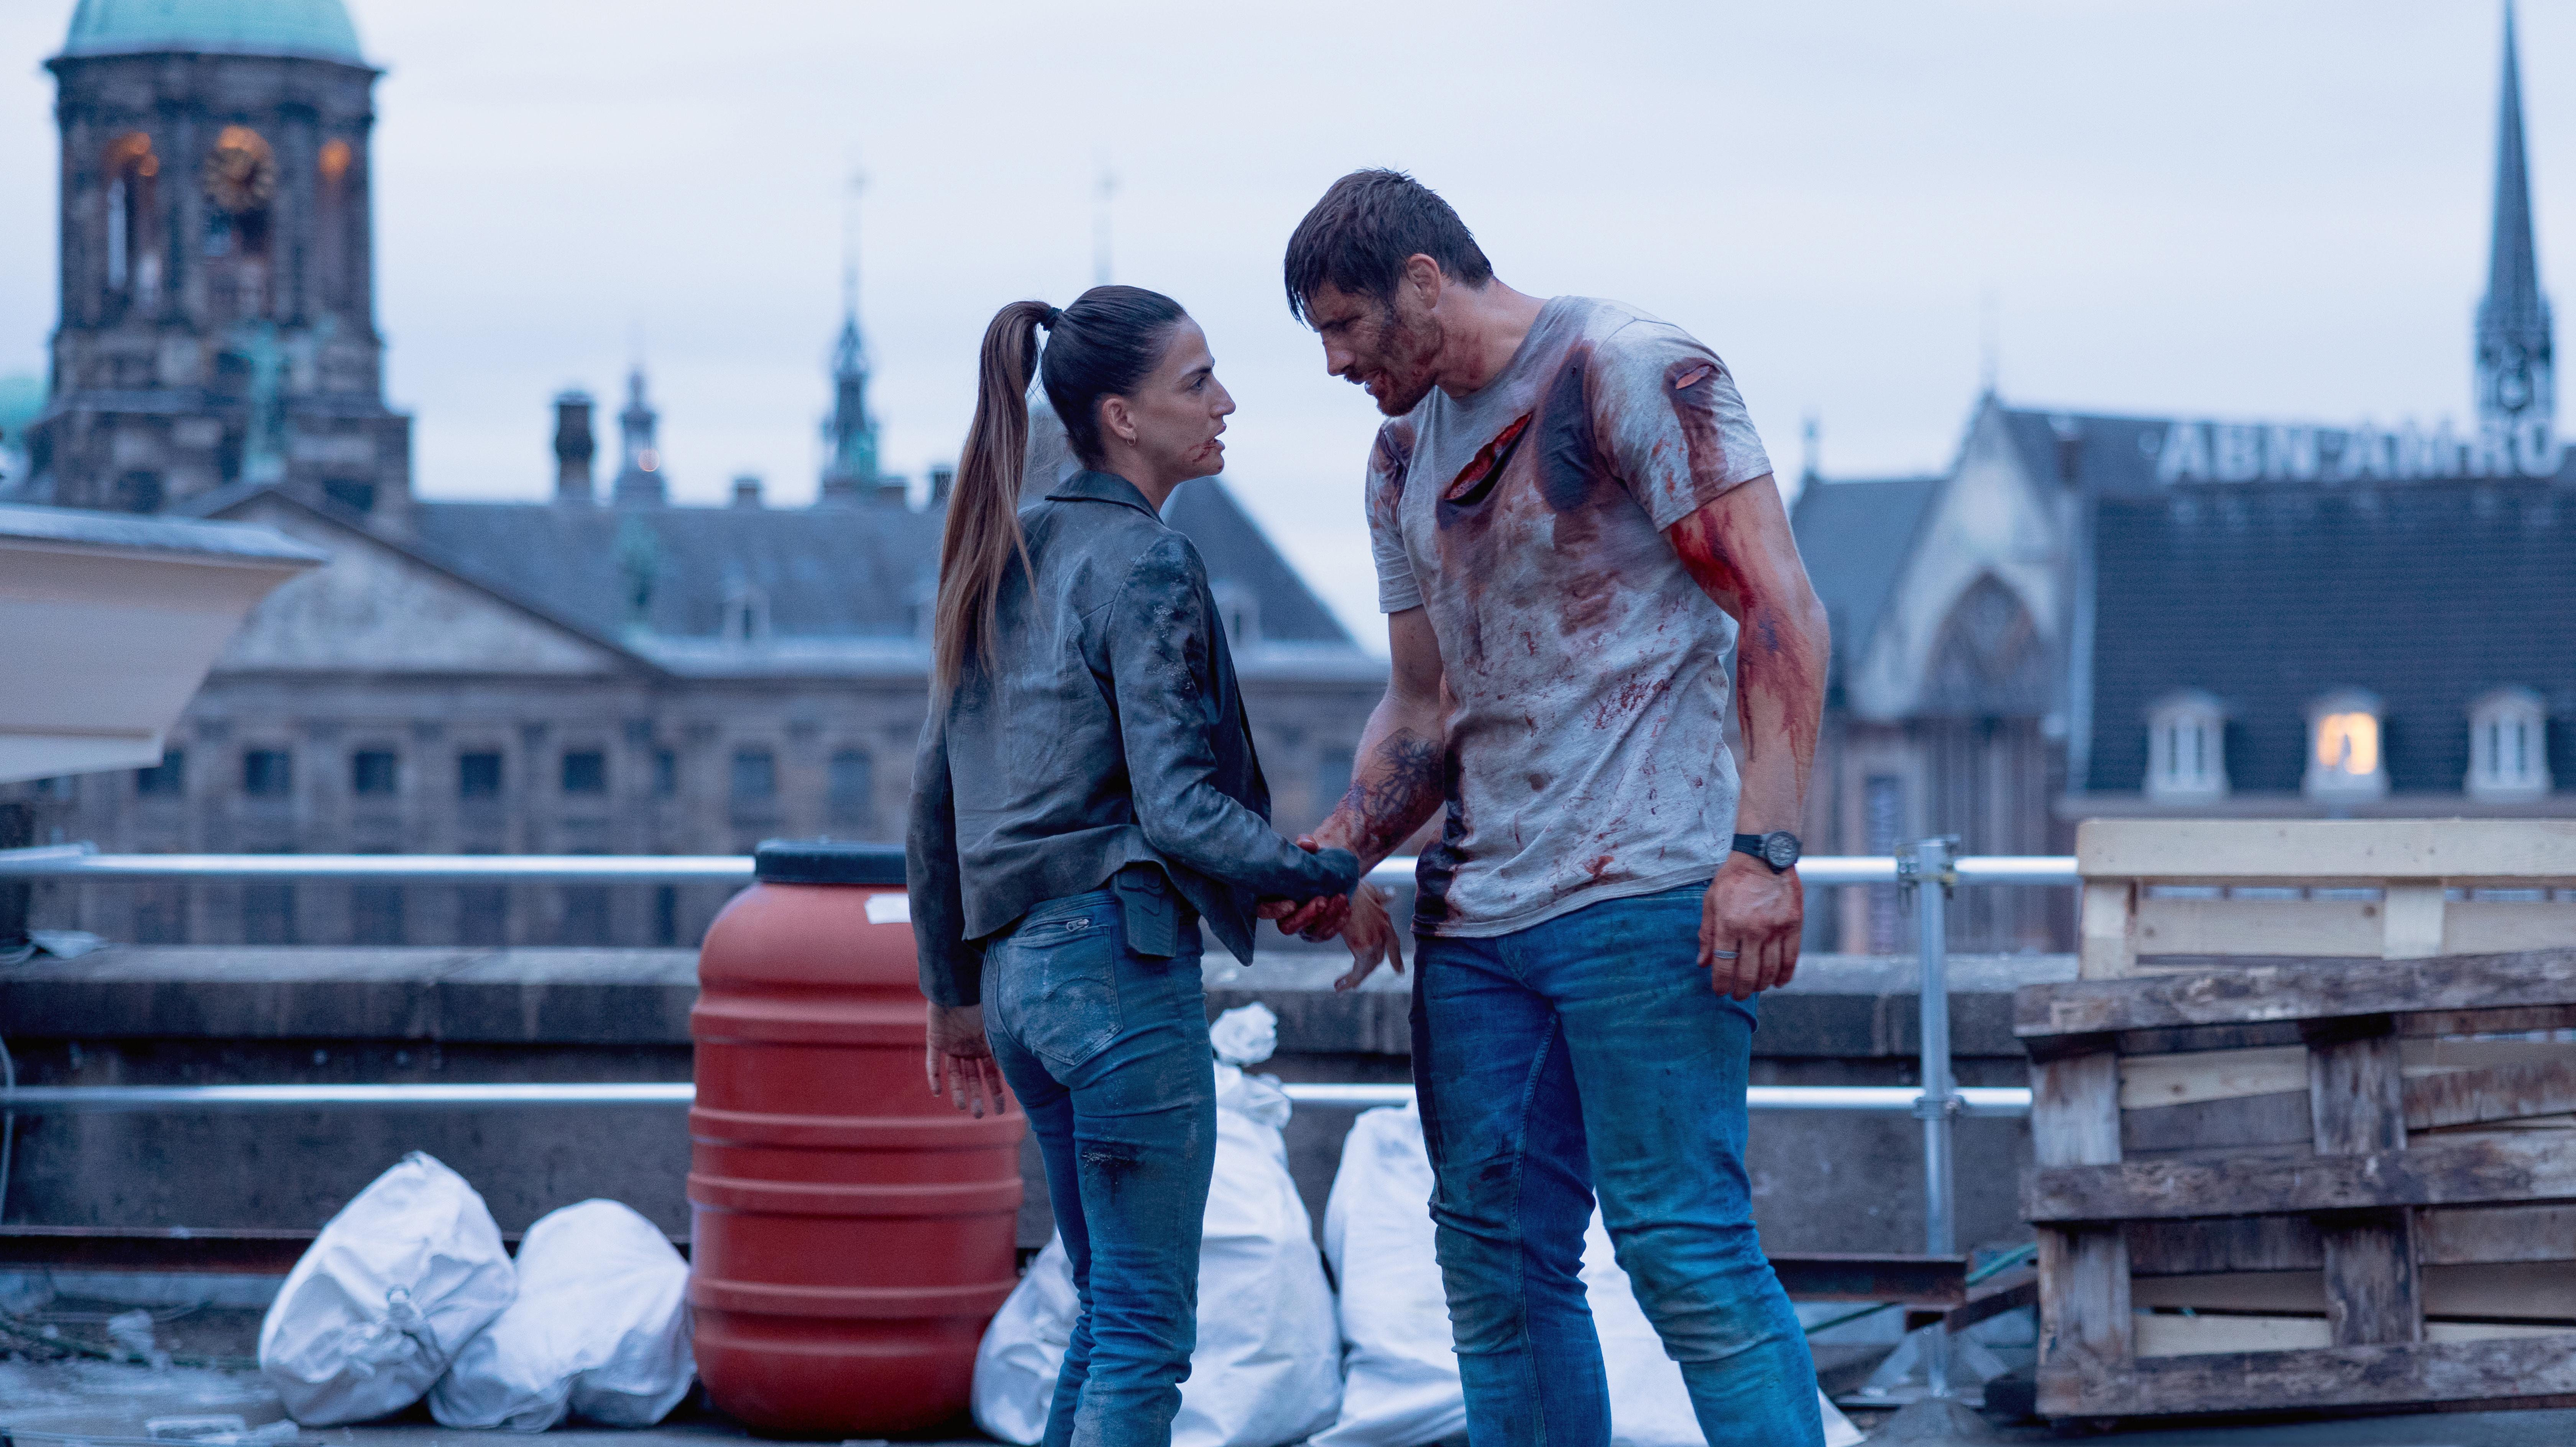 With an impressive ensemble cast including Rico Verhoeven, Marie Dompnier, and Peter Franzén, brace yourself for a rollercoaster of action and suspense. Premiering on July 21.